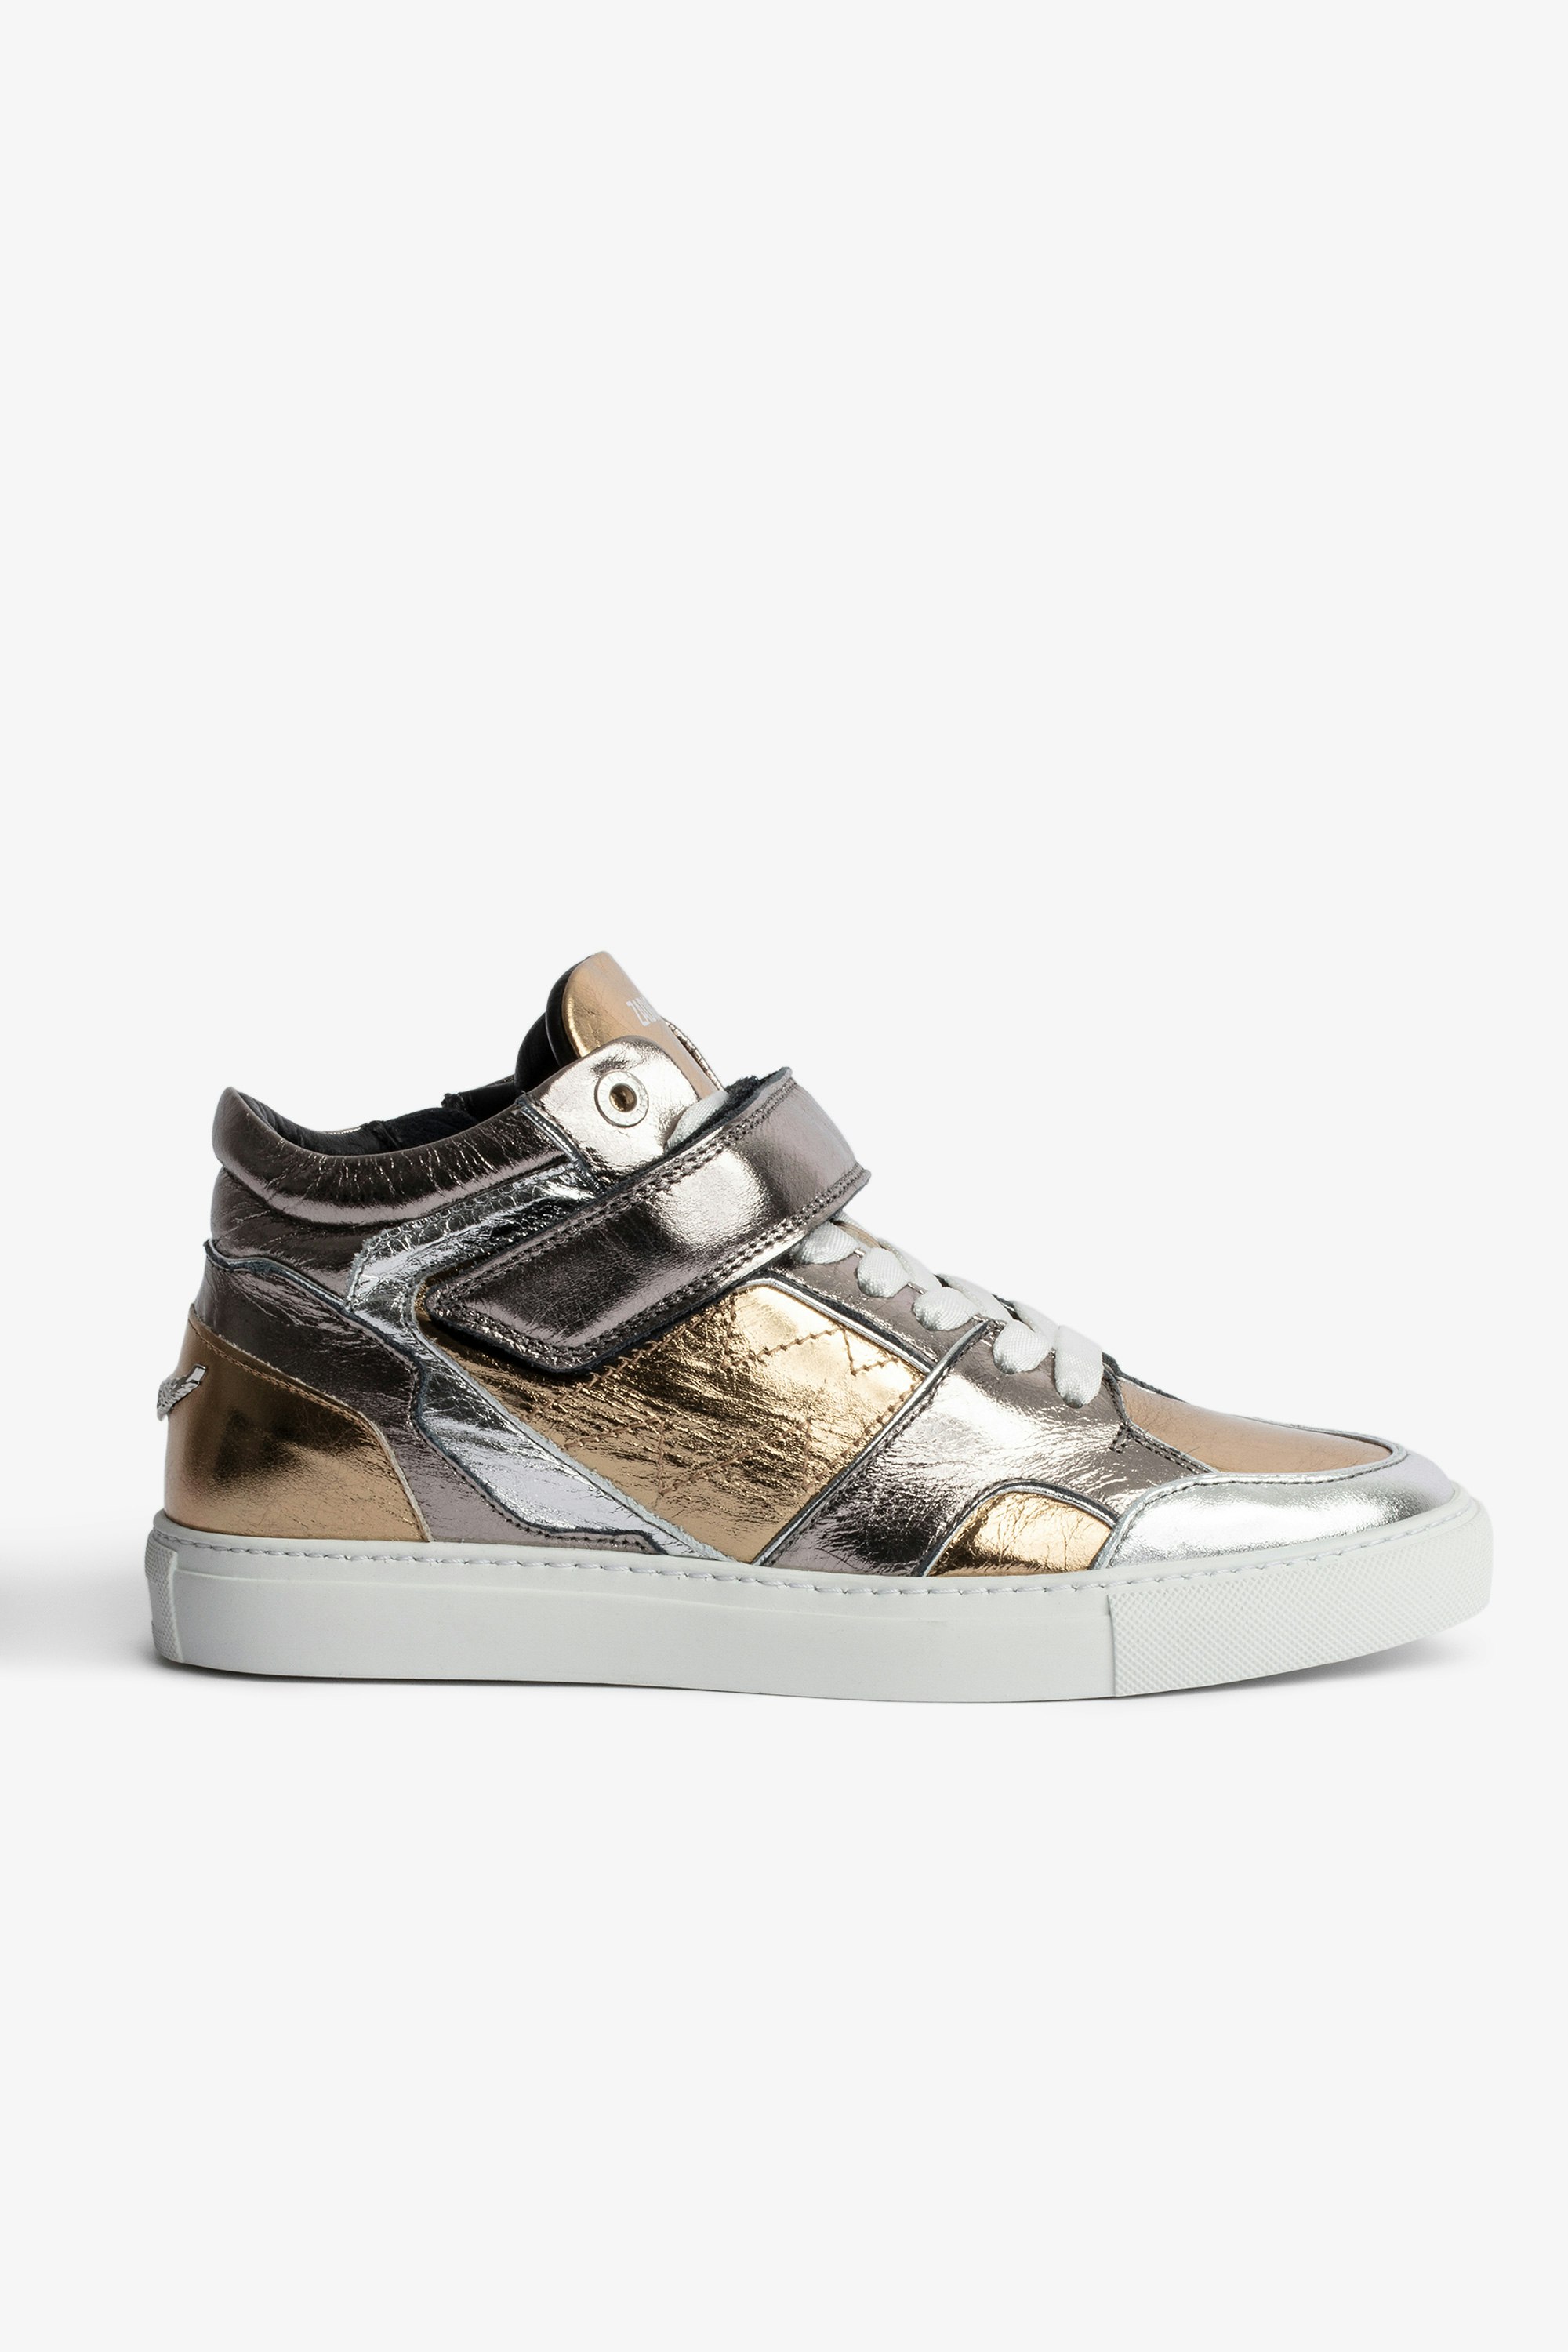 ZV1747 Mid Flash Vintage metal mix Sneakers Women’s mid-top sneakers in silver and gold metallic leather